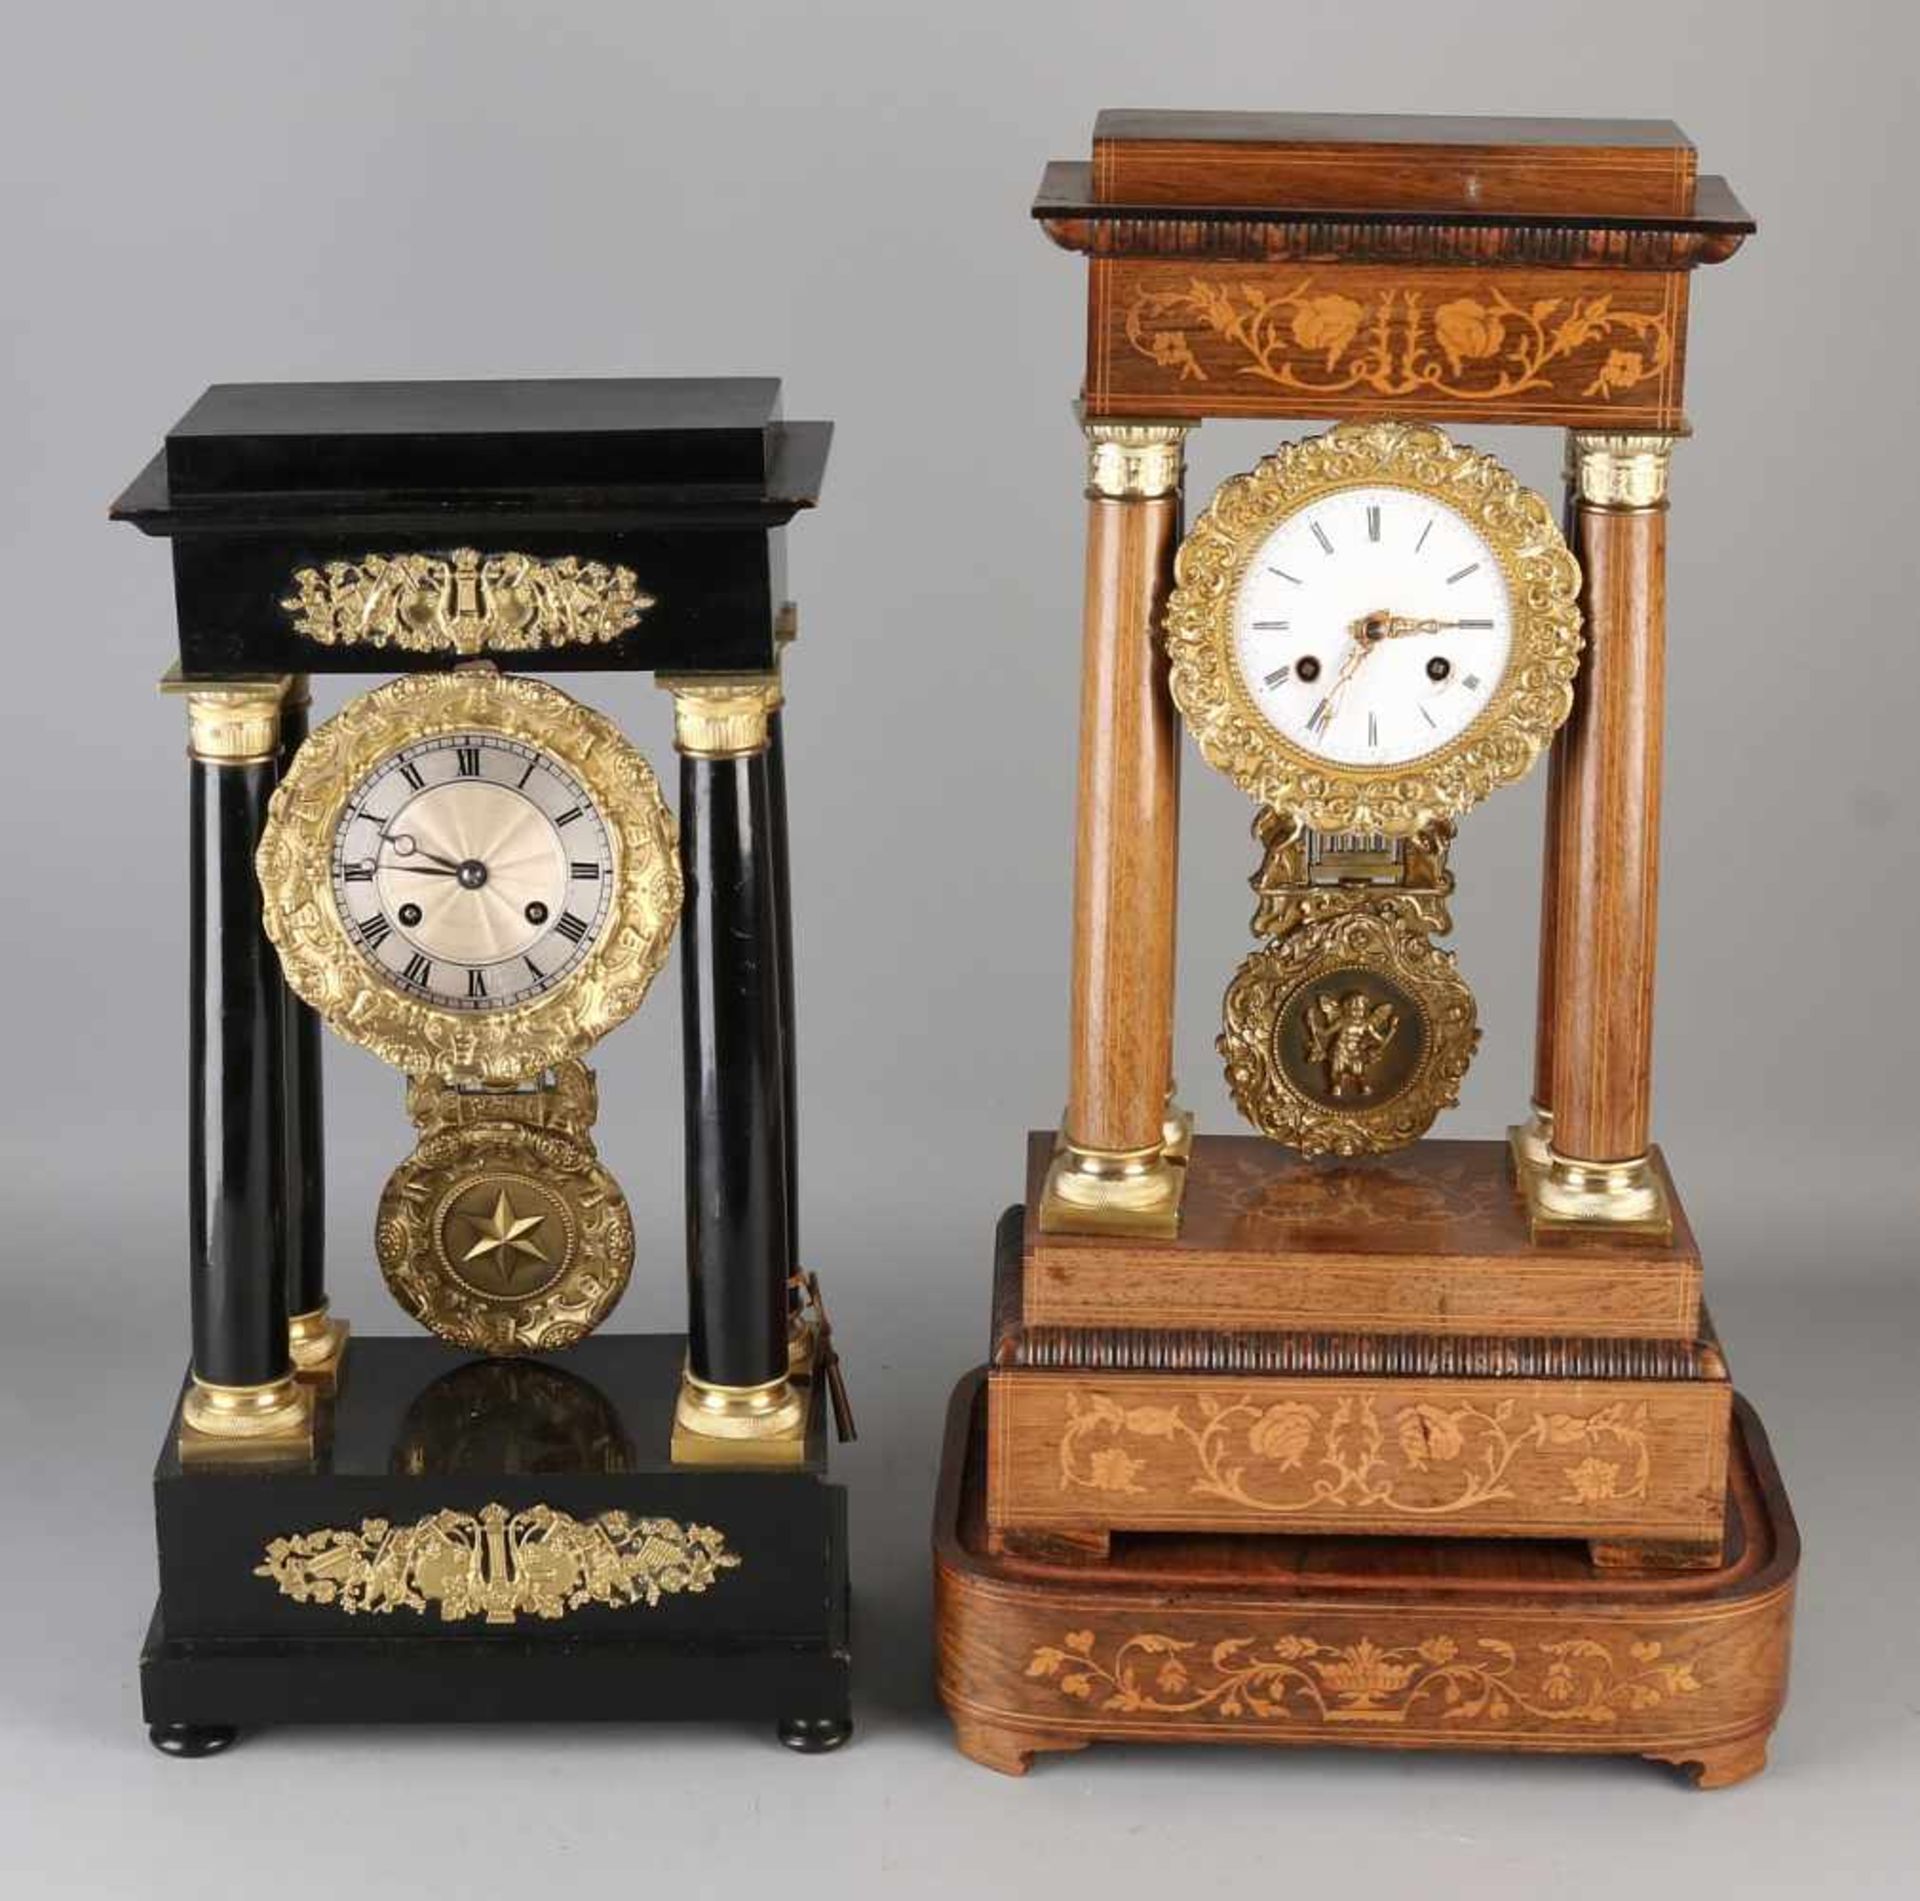 Two column clocks. One time 19th century French geeboniseerde column clock with gilt brass